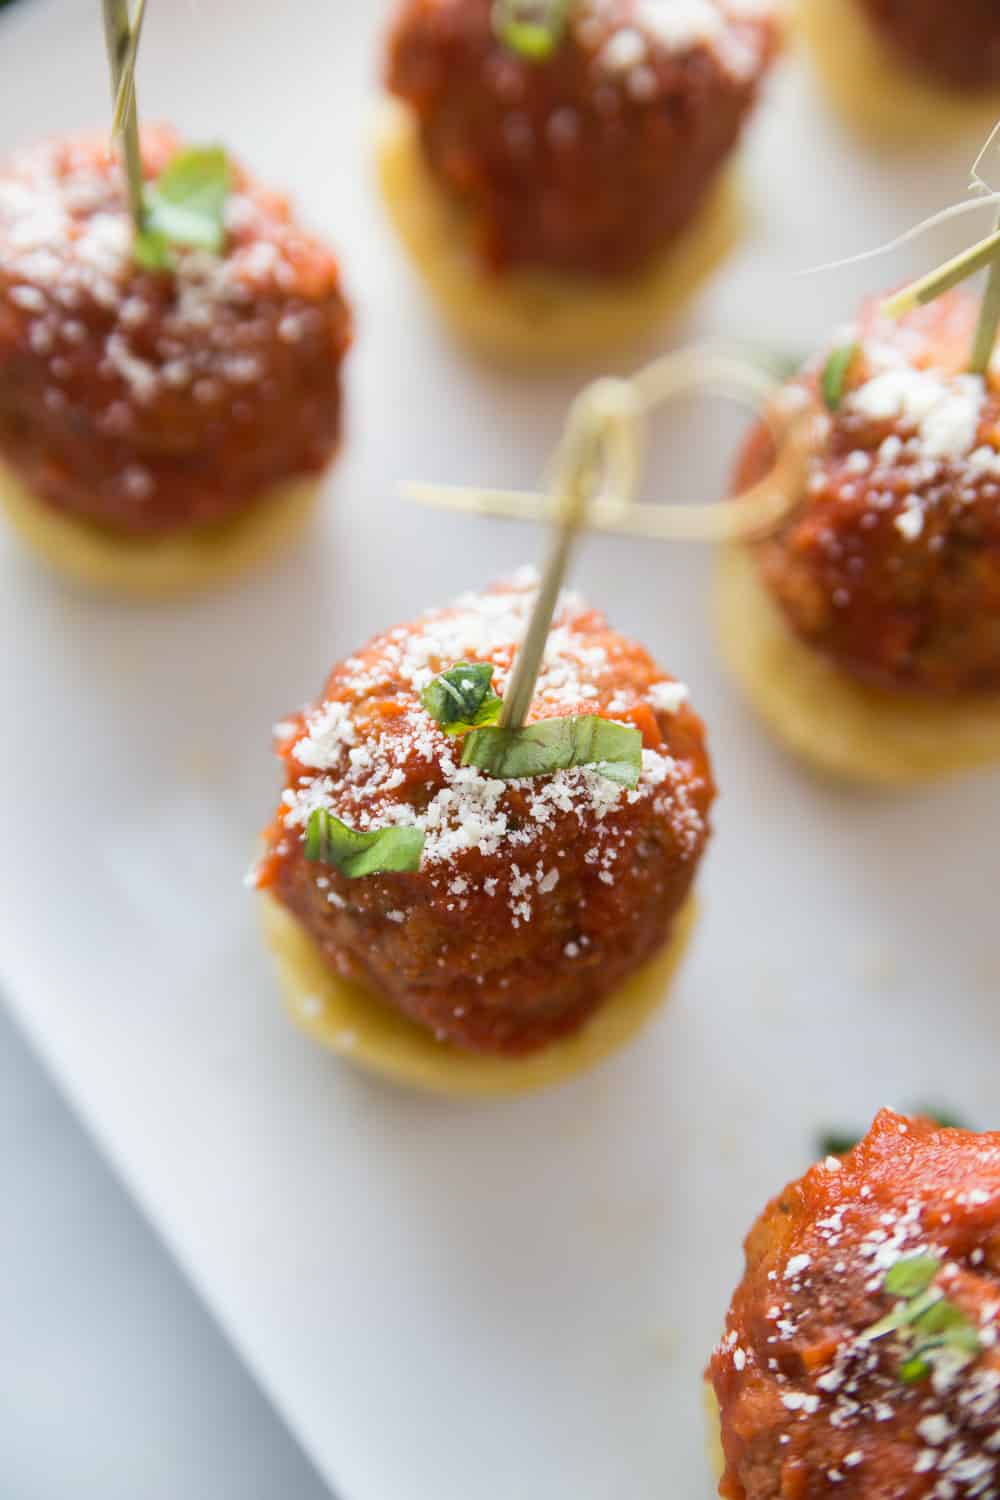 birds eye view of an Italian meatball appetizer with a stick